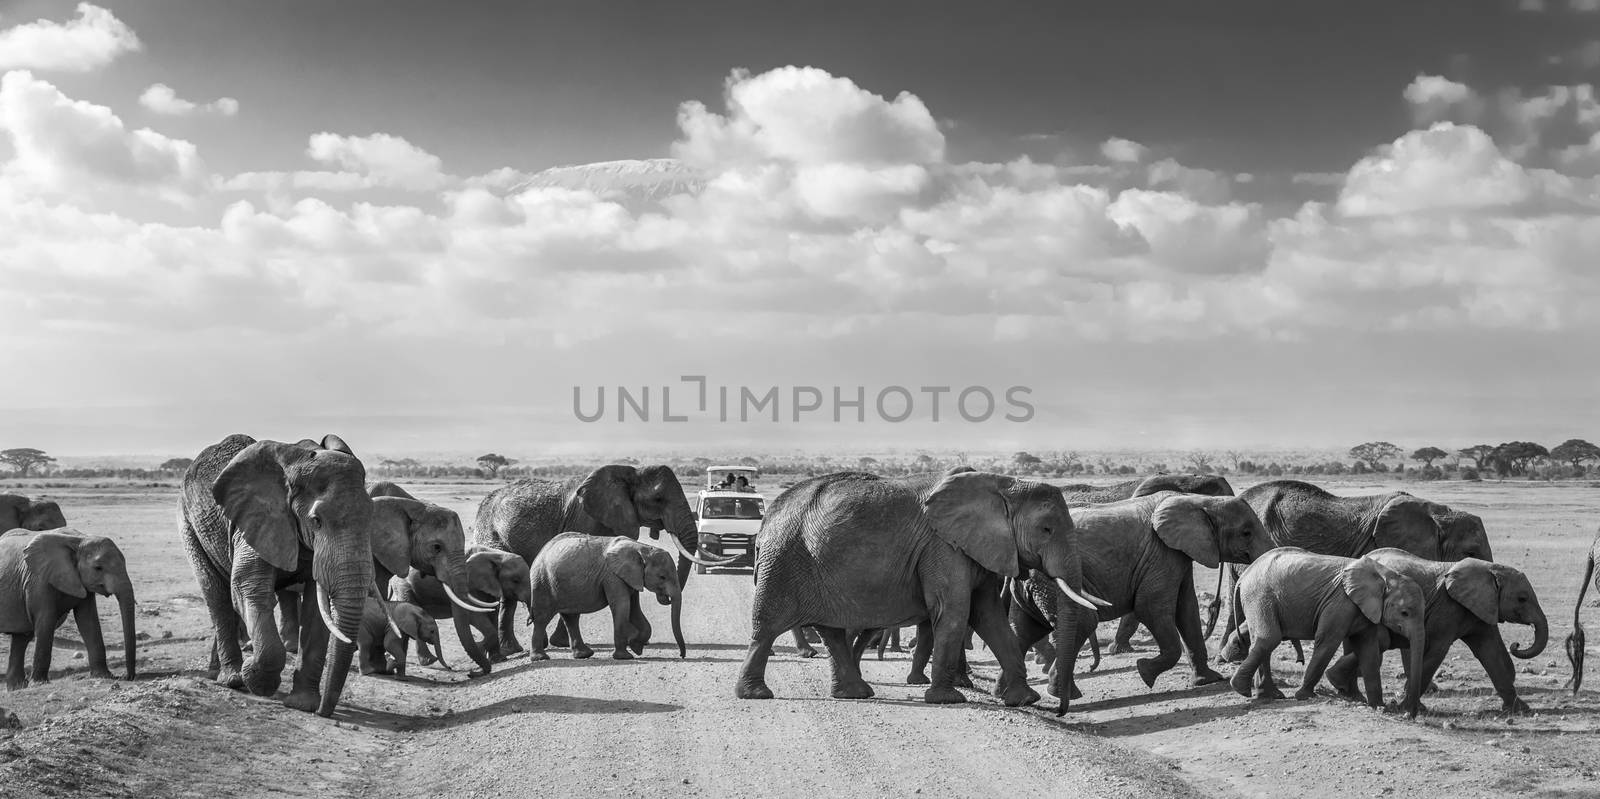 Tourists in safari jeeps watching big hird of wild elephants crossing dirt road in Amboseli national park, Kenya. Peak of Mount Kilimanjaro in clouds in background. Black and white.